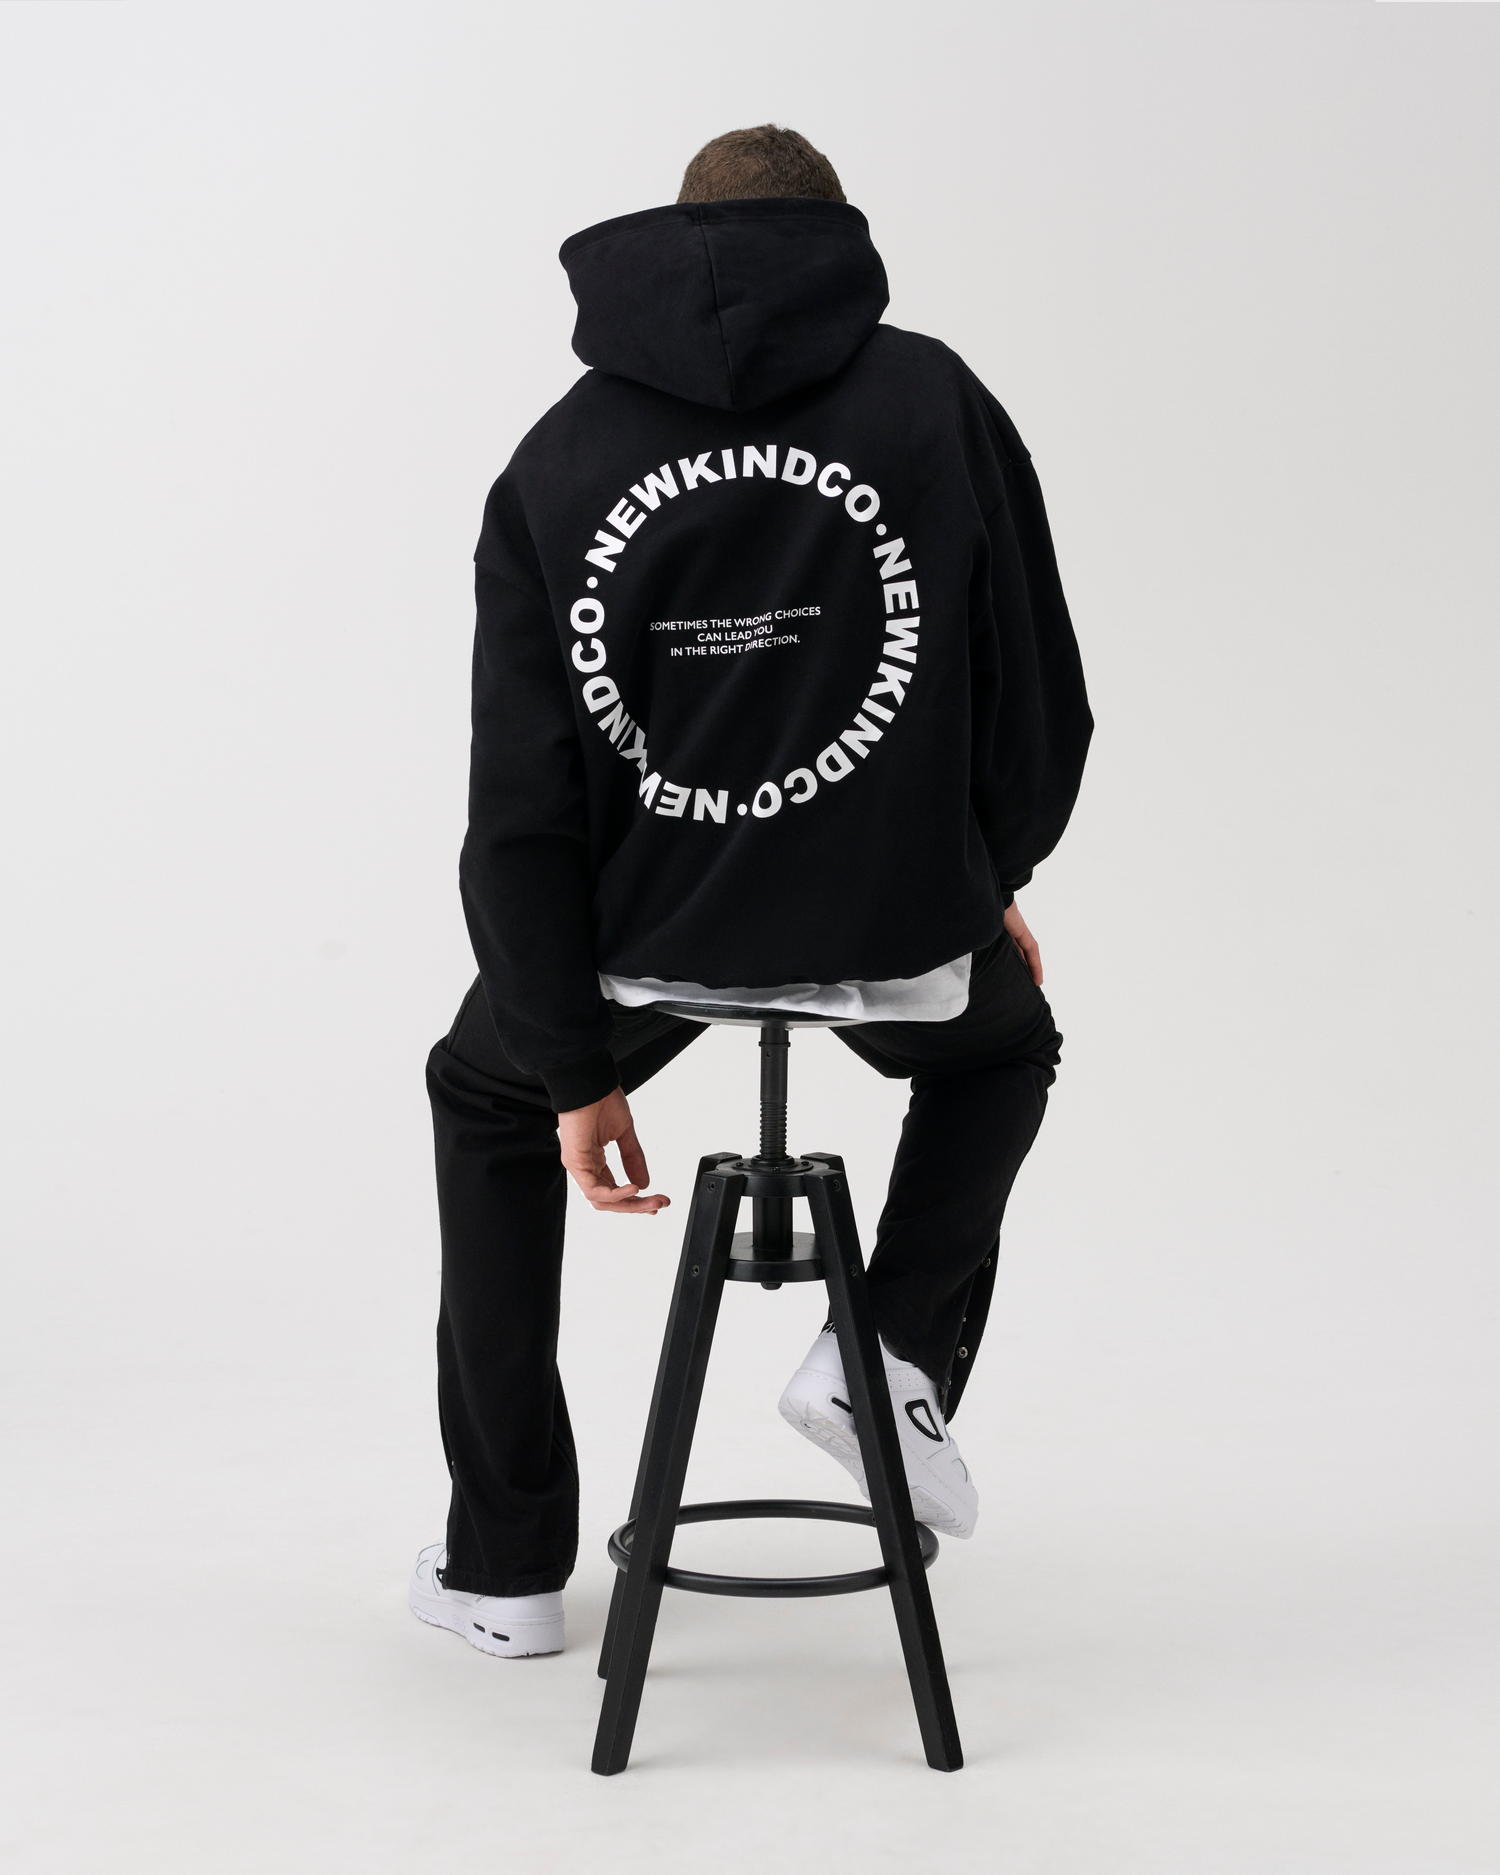 Newkind stands for minimalistic, cozy and luxury wear brand rooted in streetwear culture.